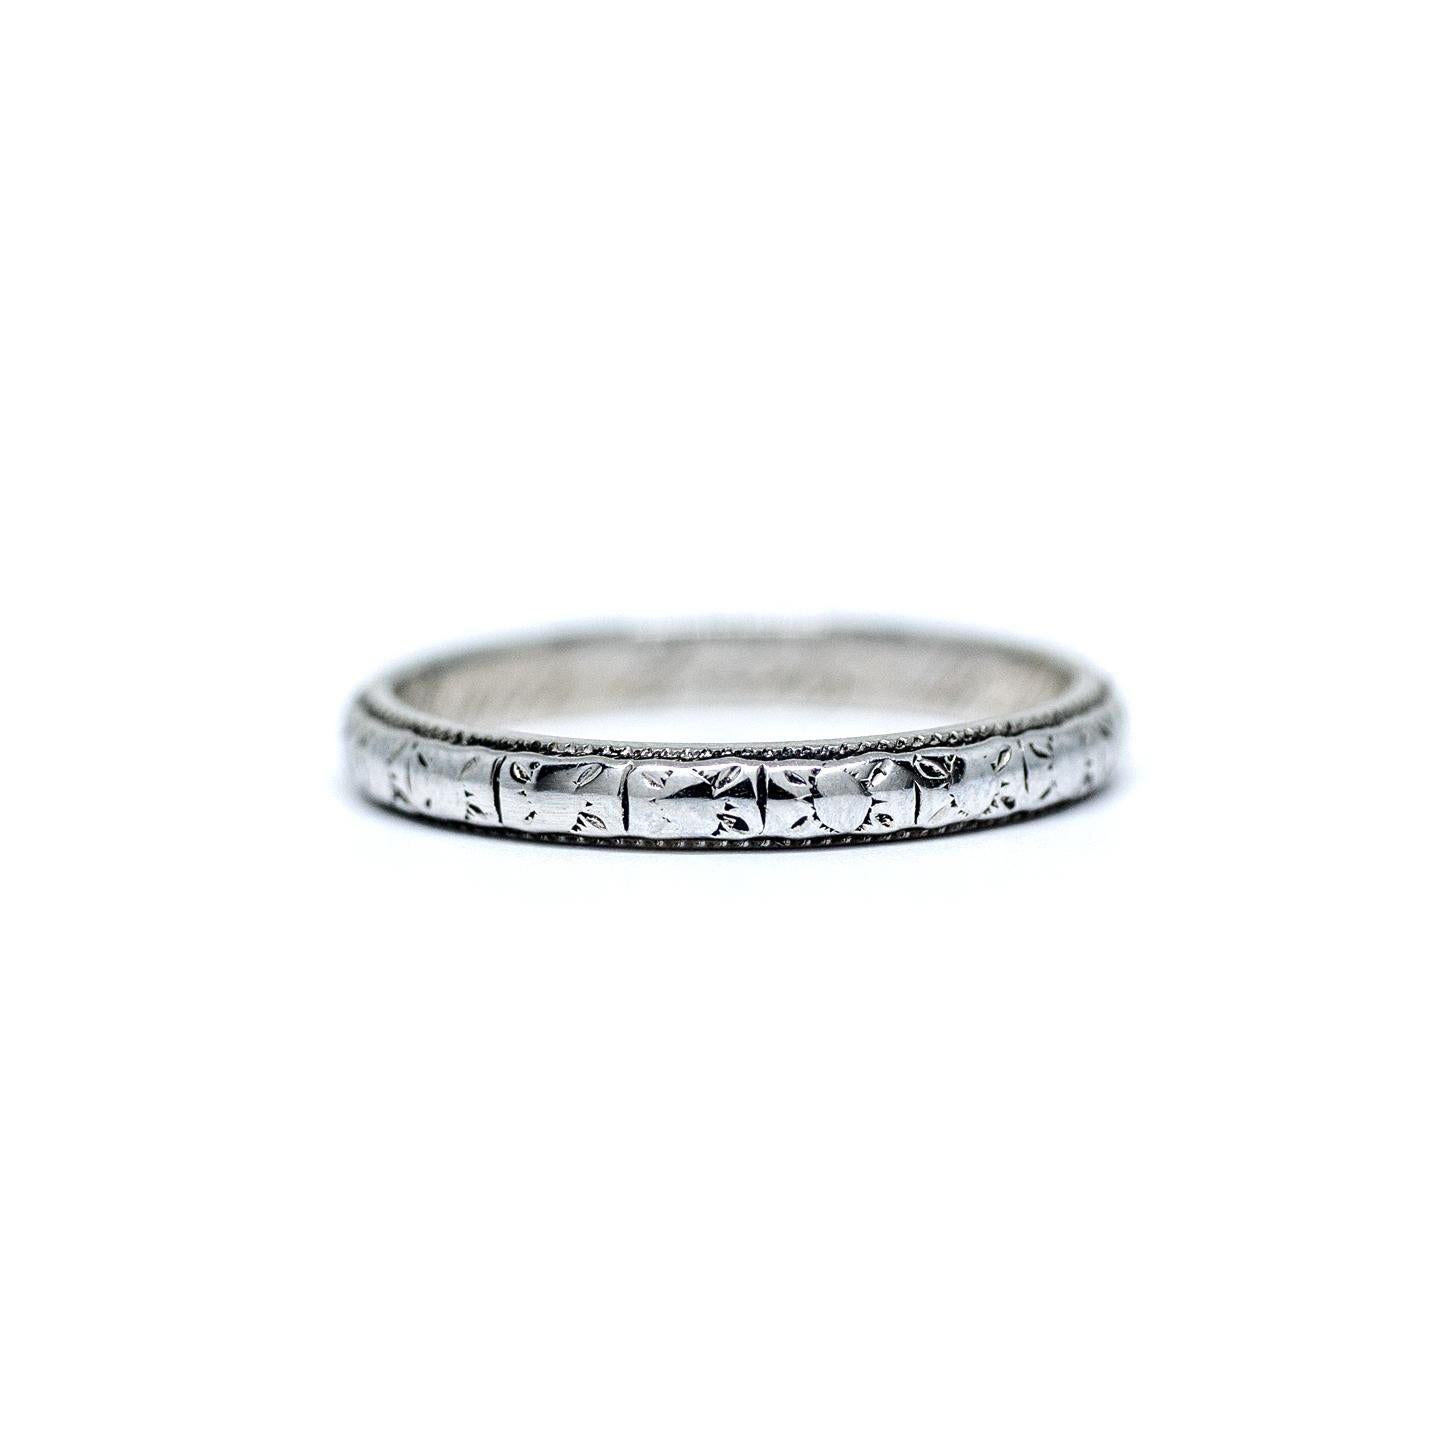 Here we have a genuine Art Deco wedding band crafted in 18 karat white gold! With a beautiful classic Art Deco geometric etched design wrapping all of the way around the band this is sure to tie in beautifully with your vintage engagement ring! At